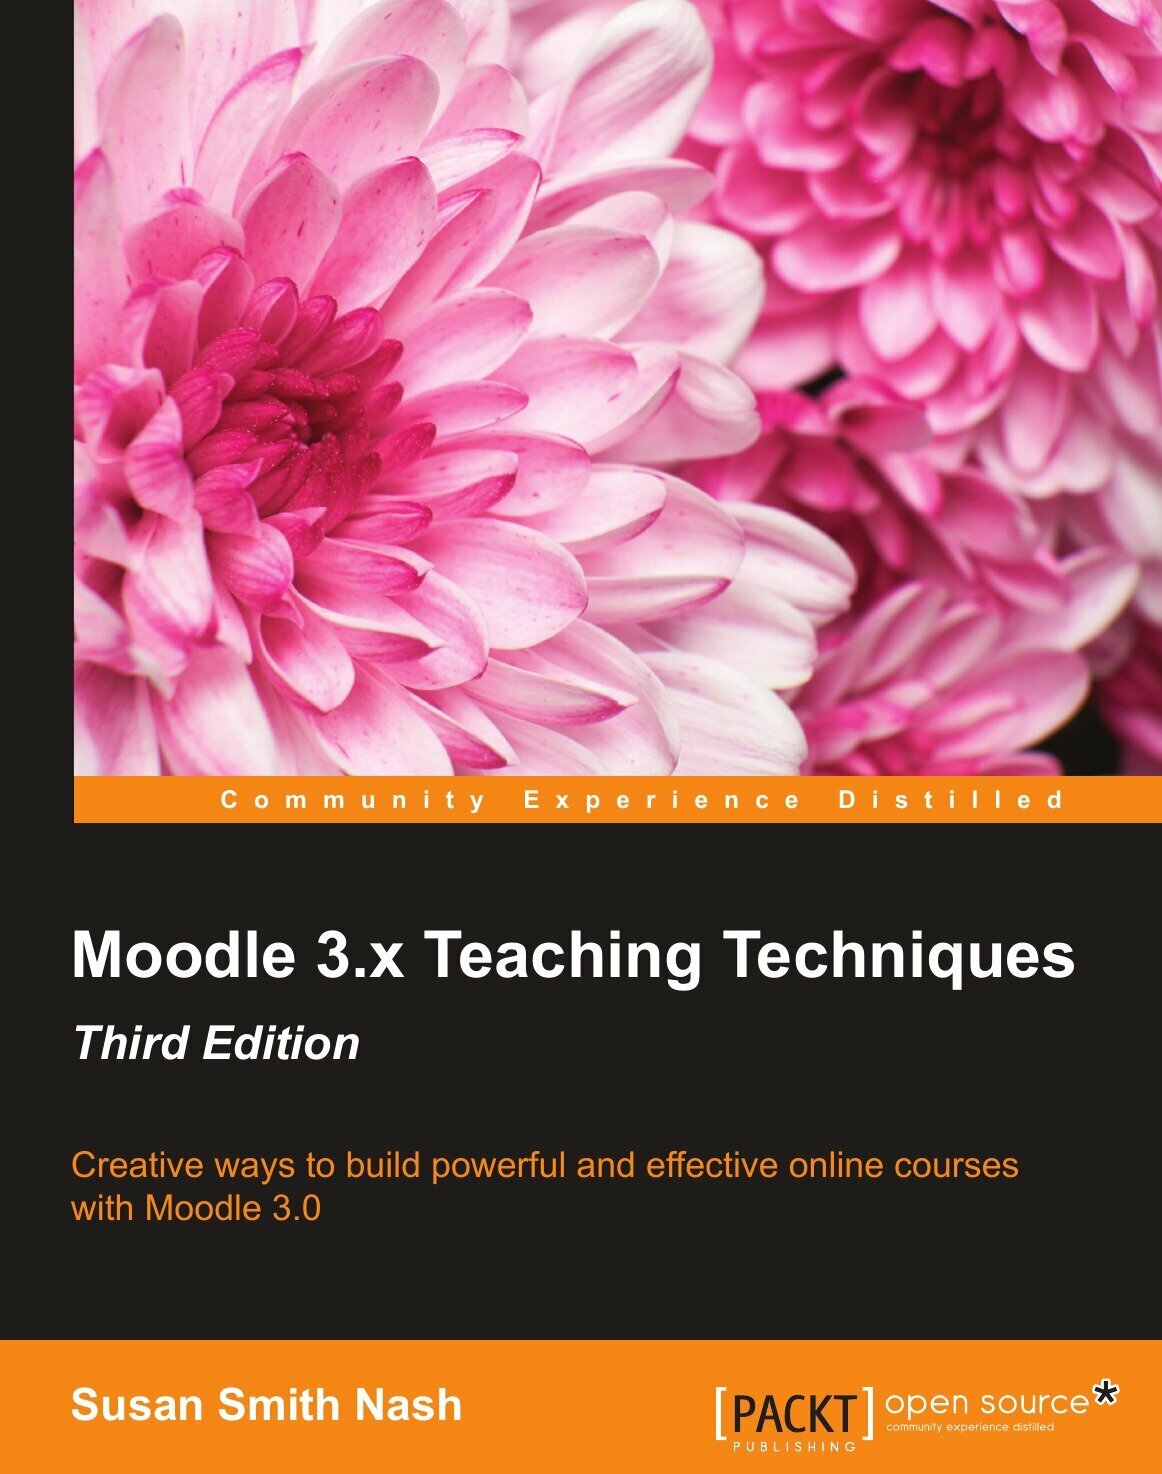 Moodle 3. x Teaching Techniques - Third Edition. Creative ways to build powerful and effective online courses with Moodle 3.0